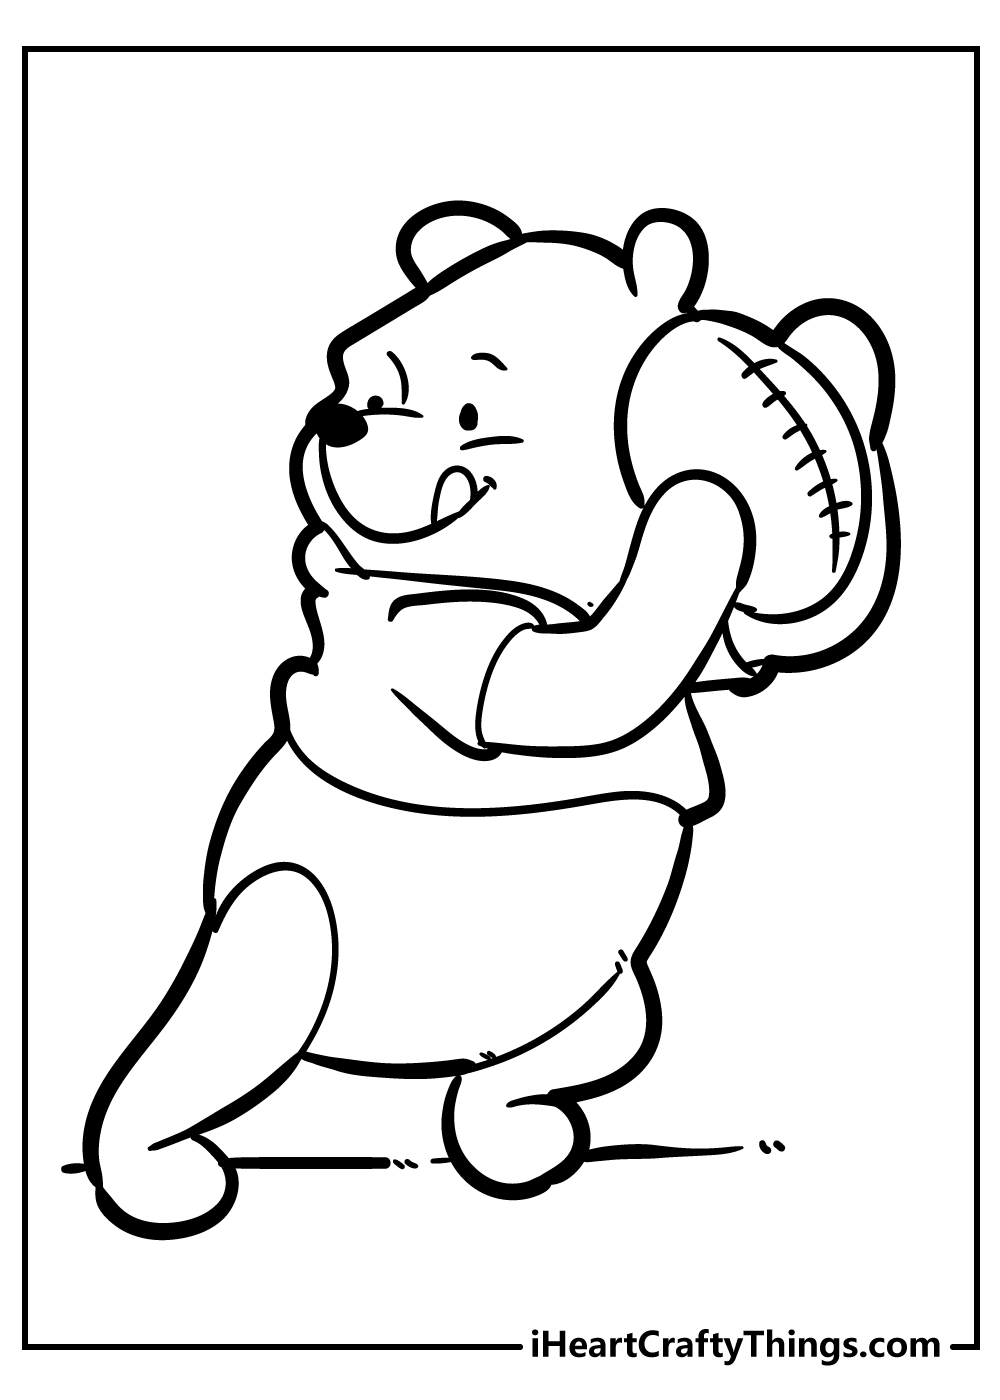 winnie the pooh coloring images for adults